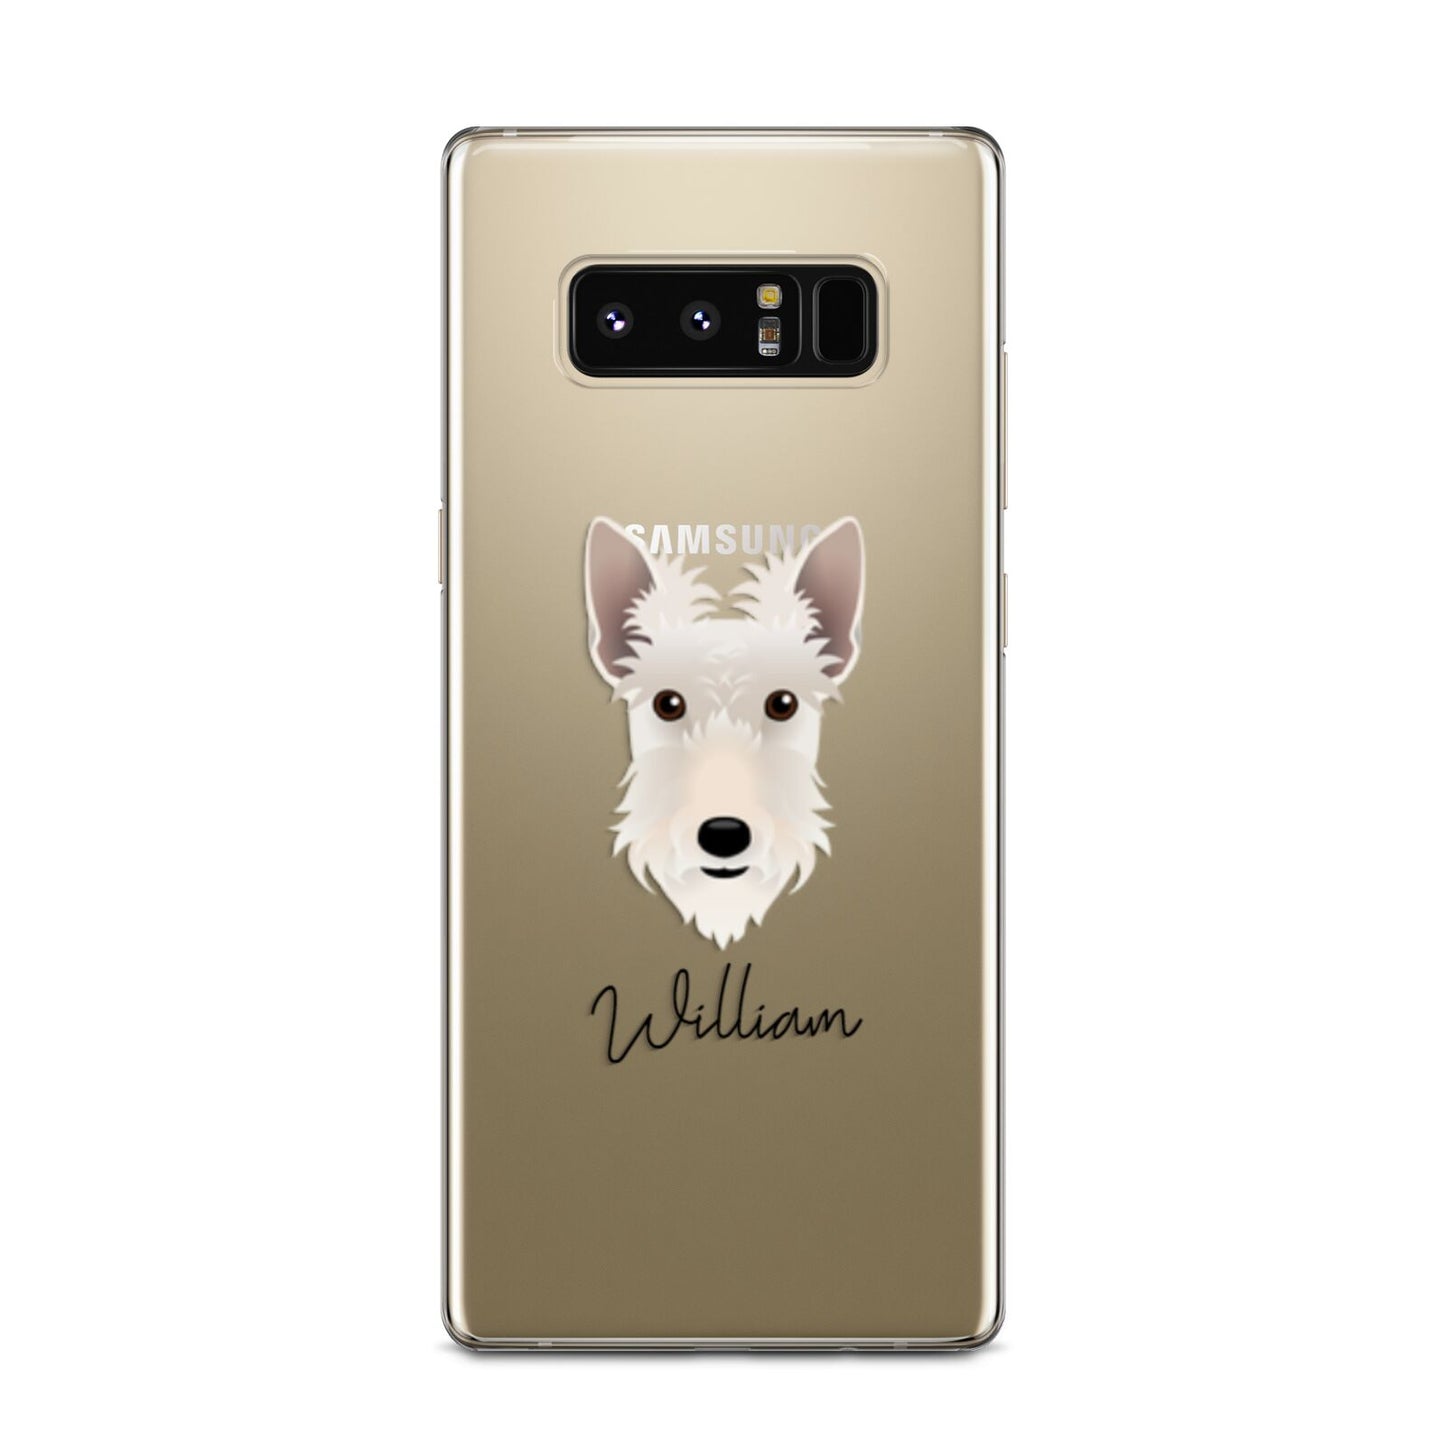 Scottish Terrier Personalised Samsung Galaxy Note 8 Case